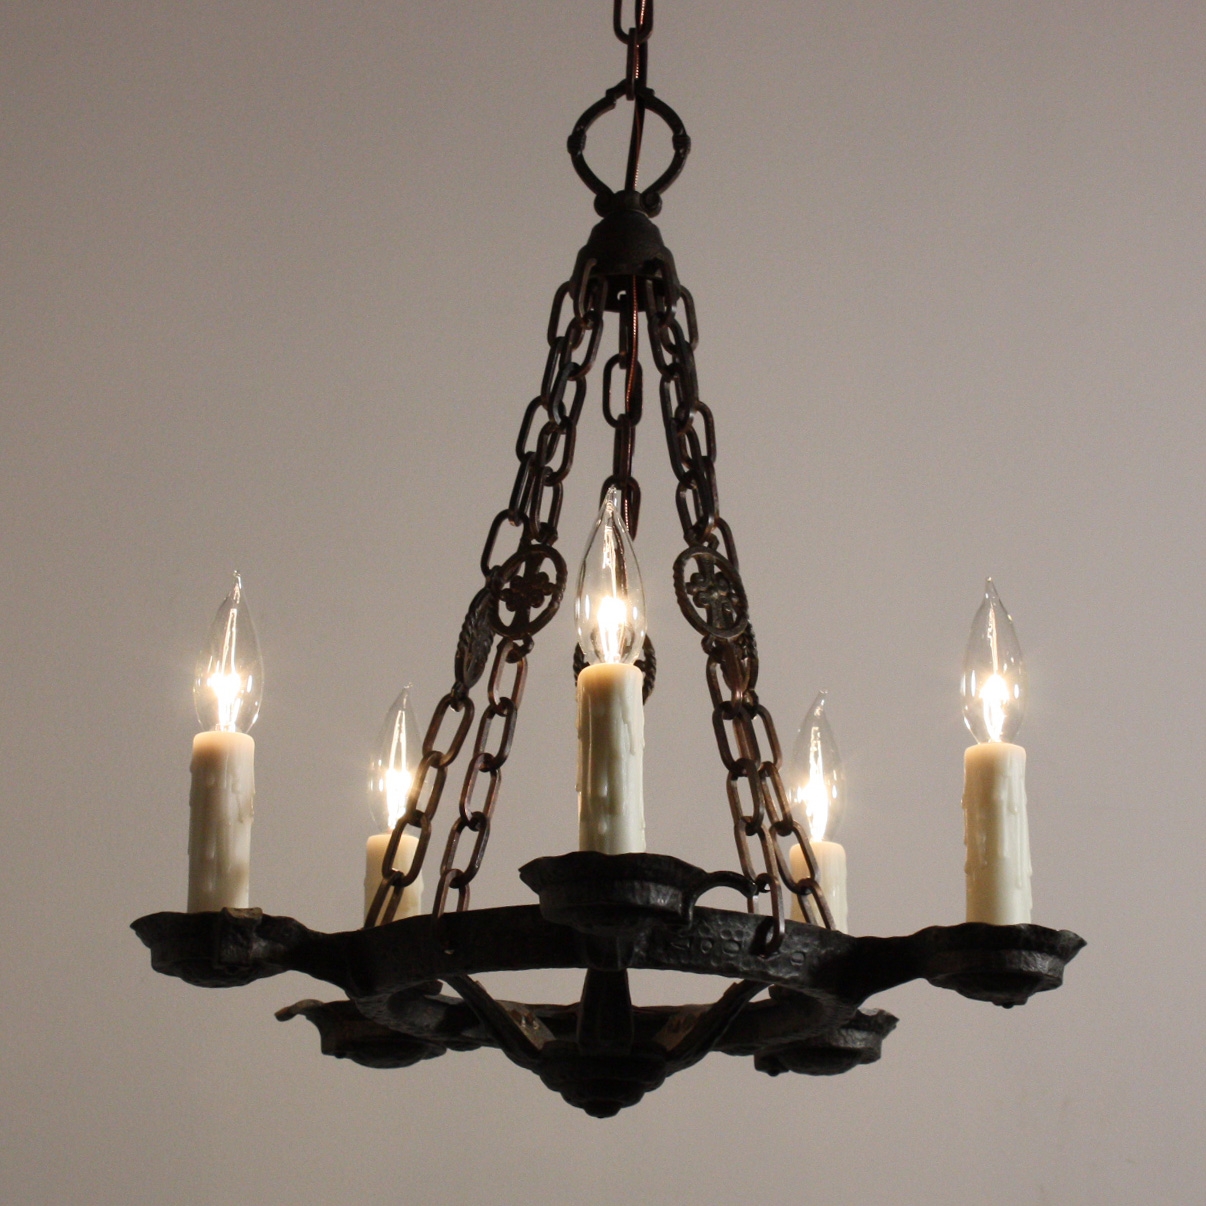 Permalink to Black Cast Iron Ceiling Lights